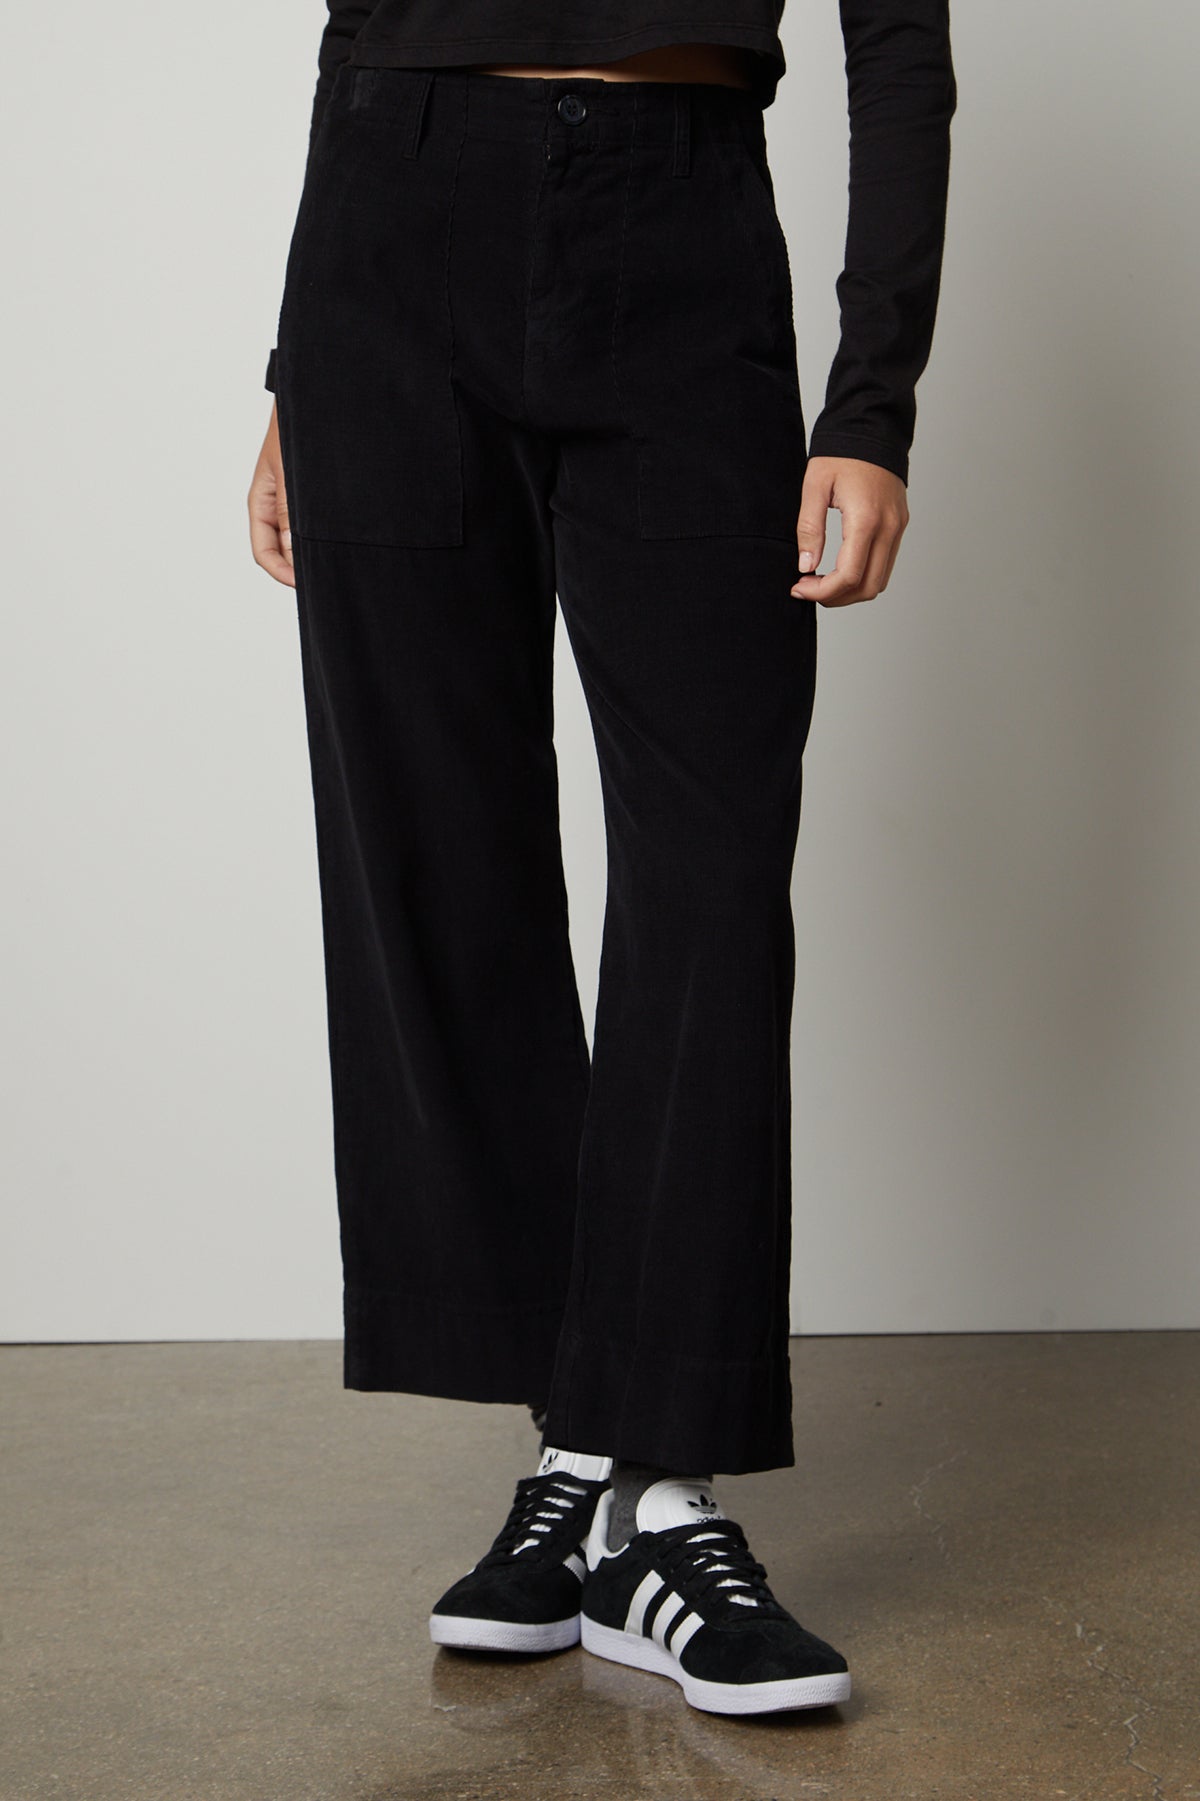 A woman wearing the Velvet by Graham & Spencer VERA CORDUROY WIDE LEG PANT and a white t-shirt.-26861576421569